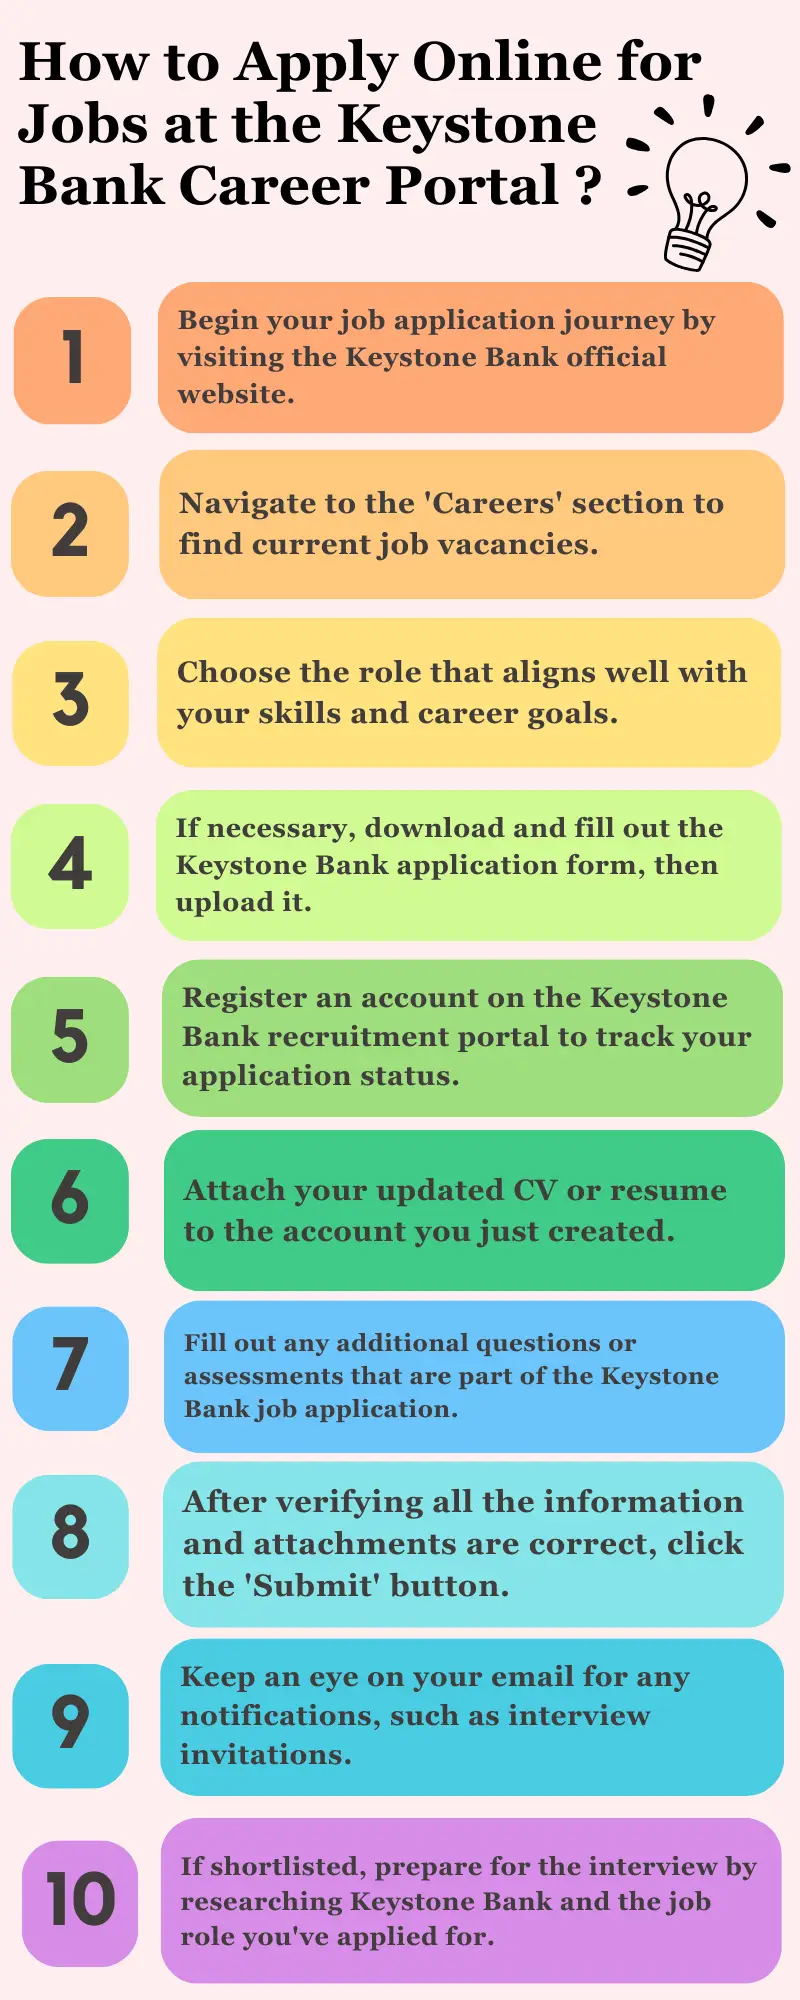 How to Apply Online for Jobs at the Keystone Bank Career Portal ?